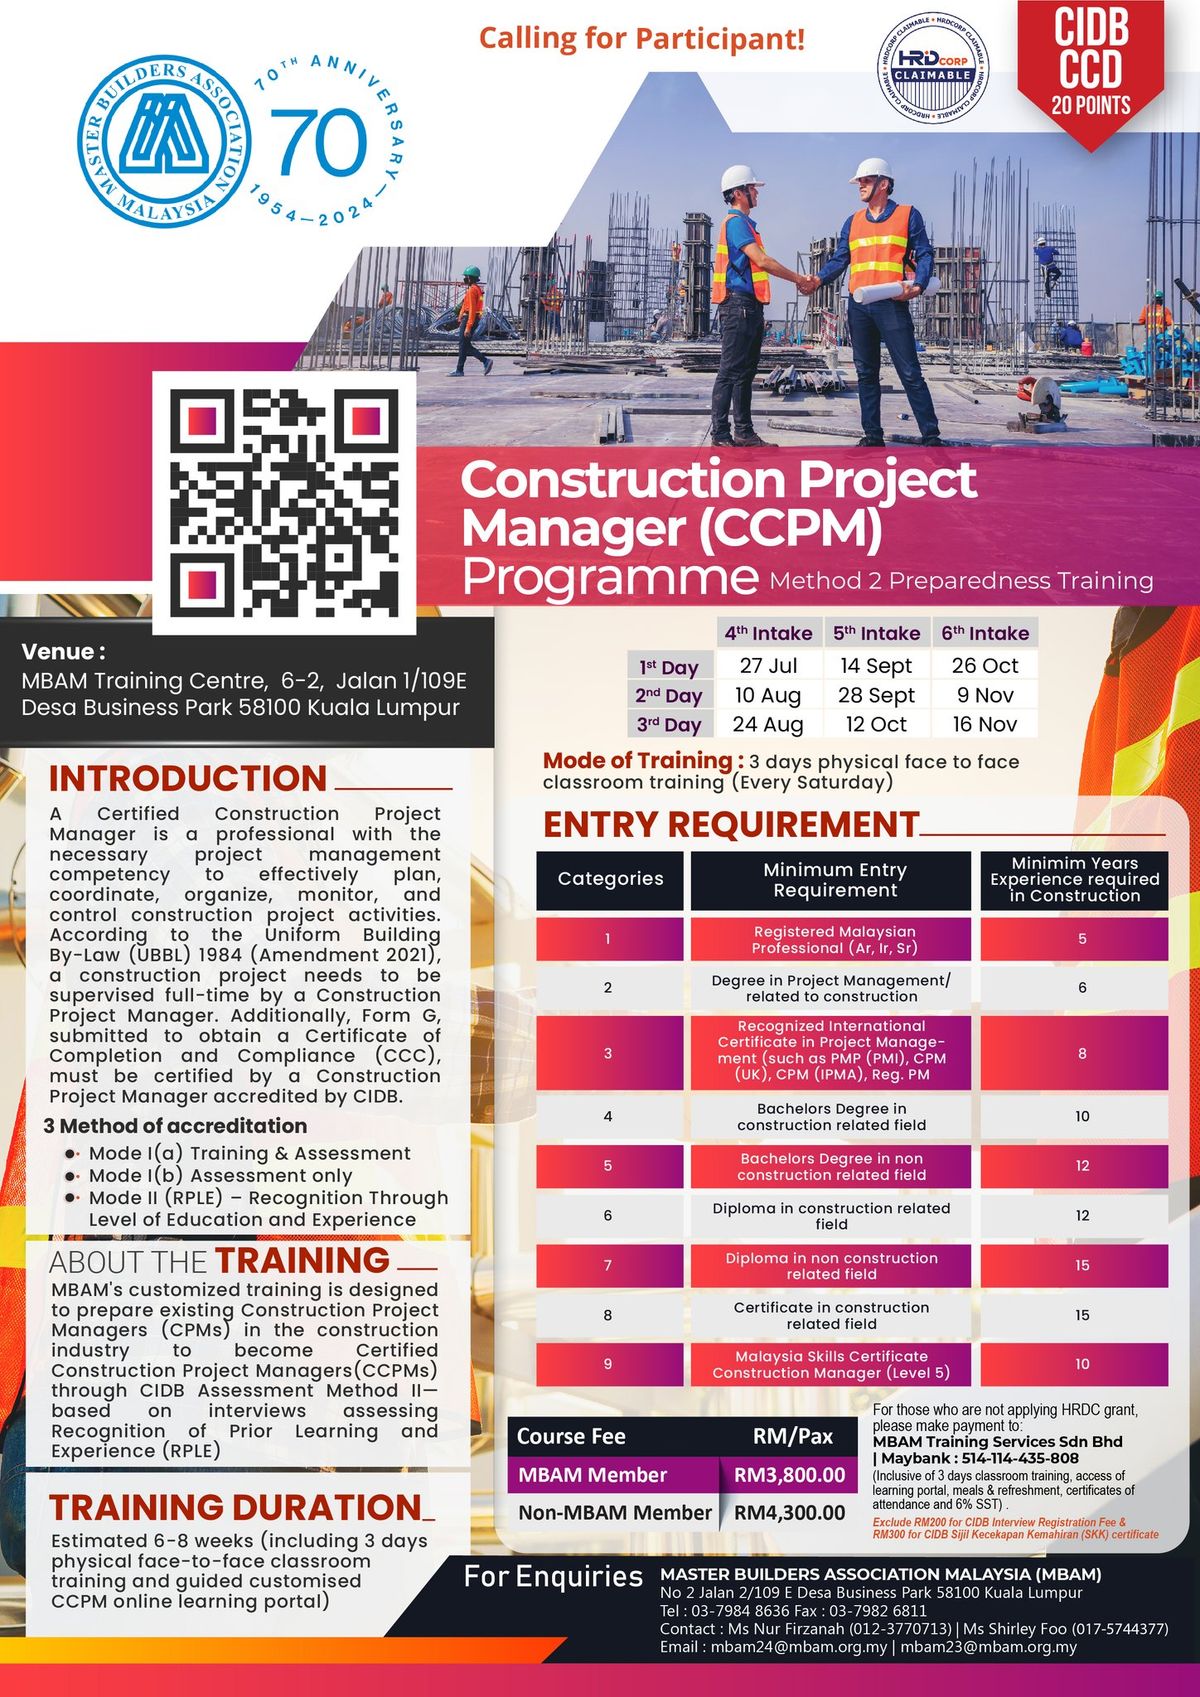 Certified Construction Project Manager (CCPM) Programme 4th Intake 1st Day